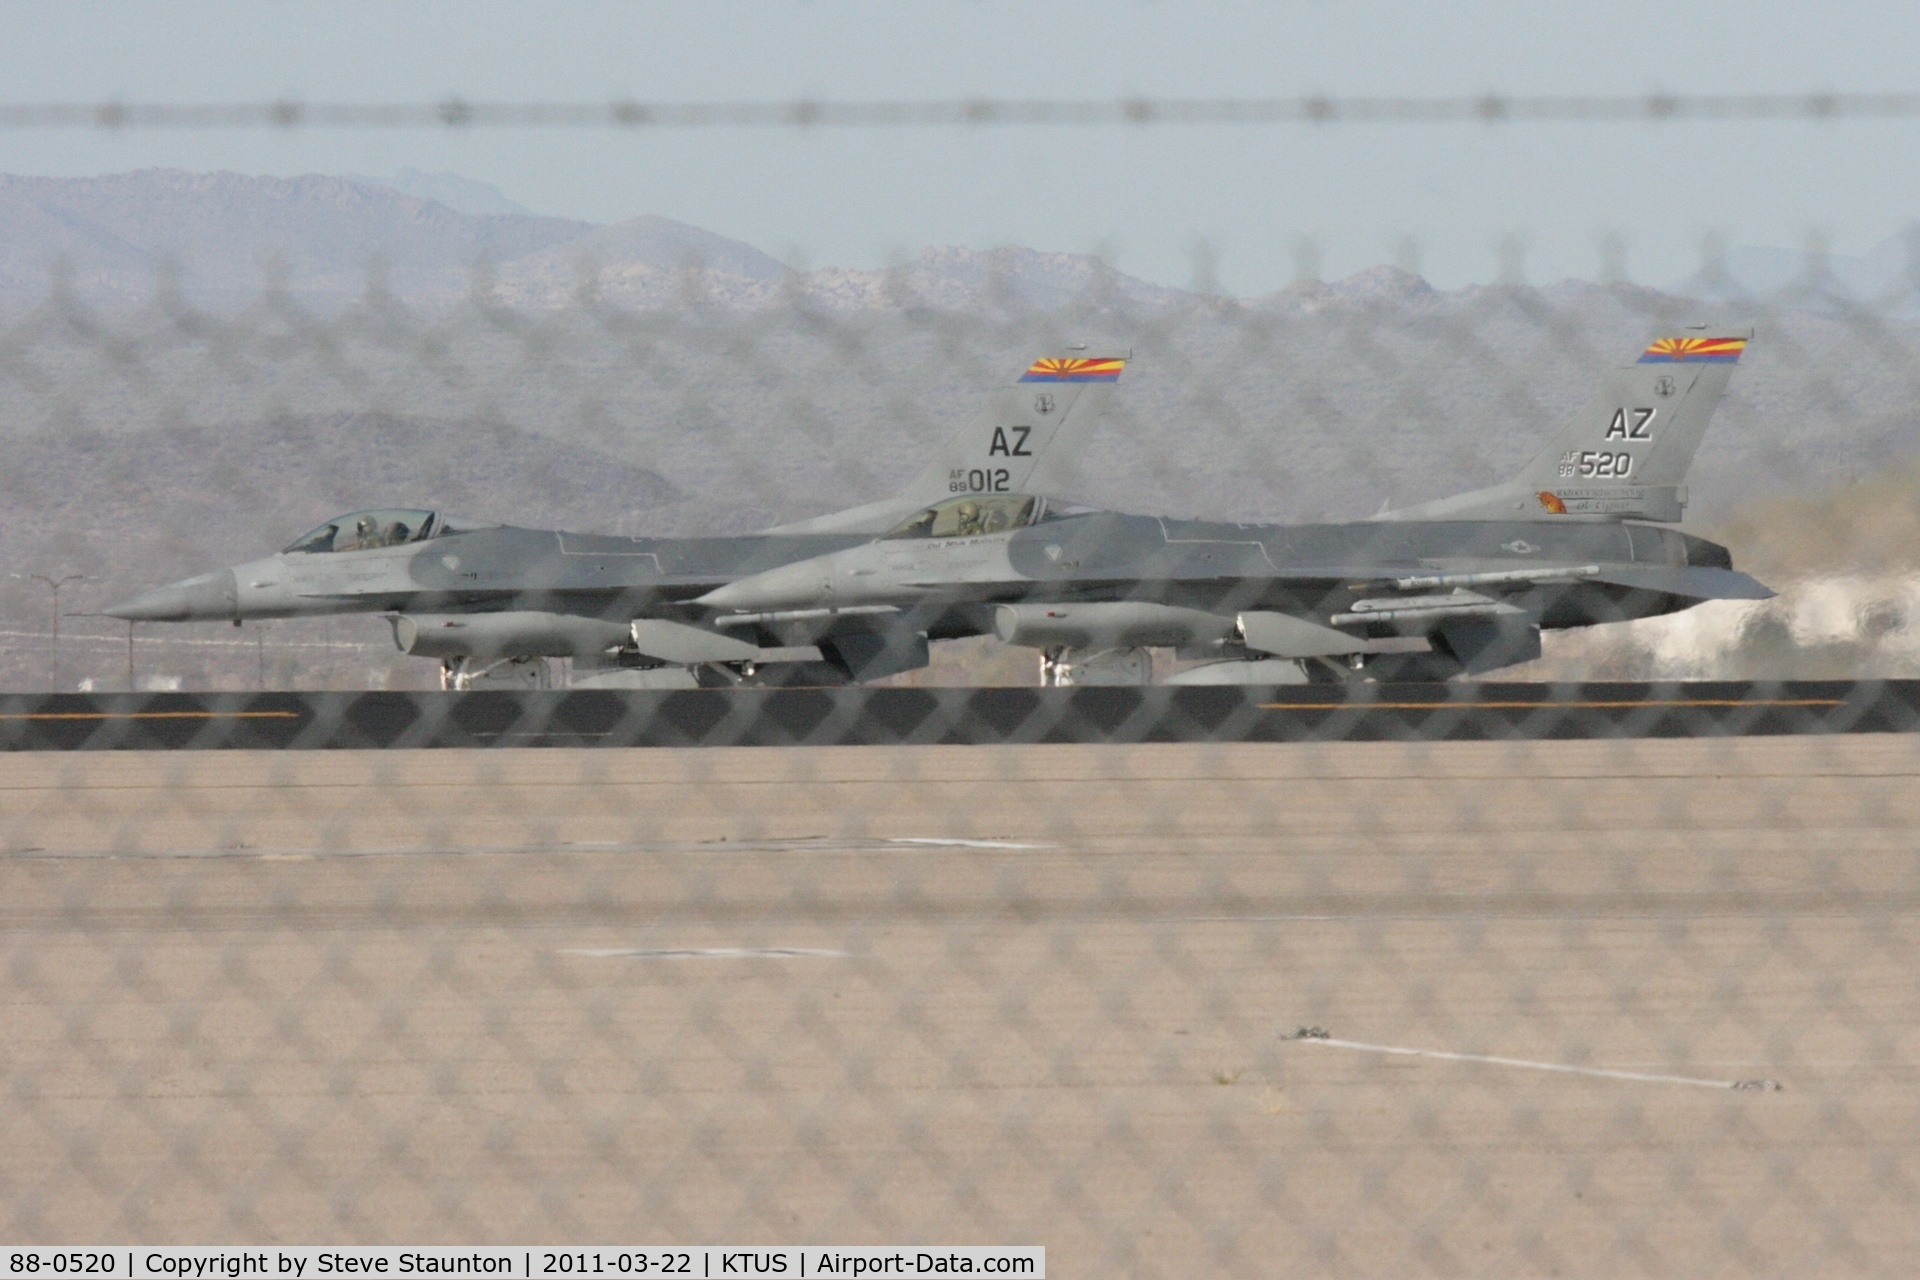 88-0520, General Dynamics F-16C C/N 1C-122, Taken at Tucson International Airport, in March 2011 whilst on an Aeroprint Aviation tour